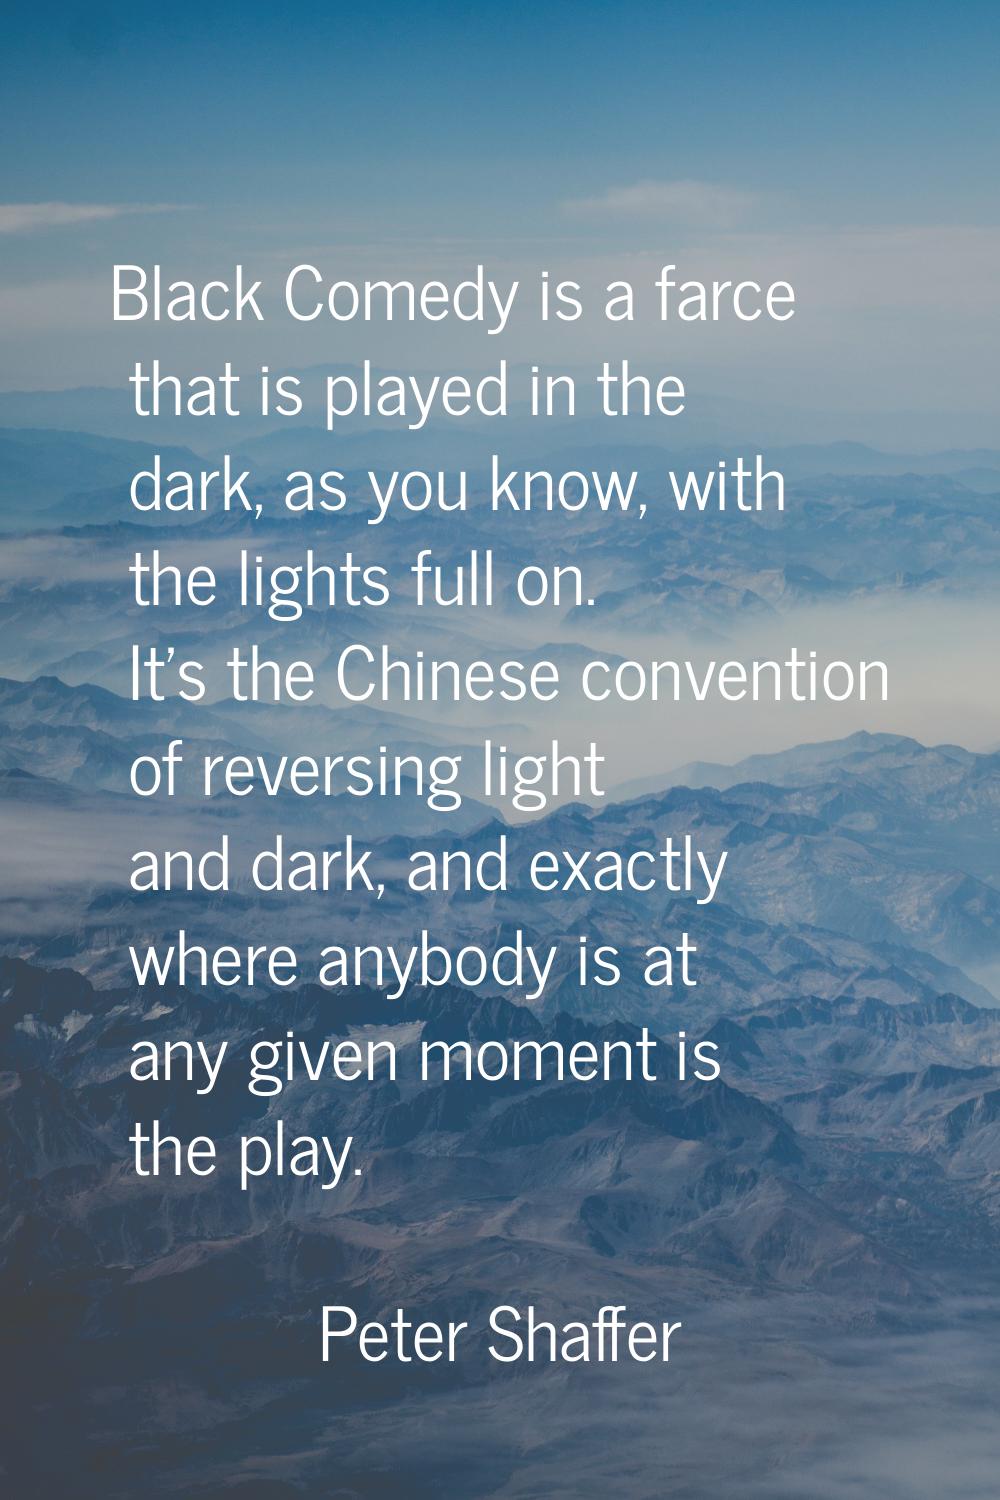 Black Comedy is a farce that is played in the dark, as you know, with the lights full on. It's the 